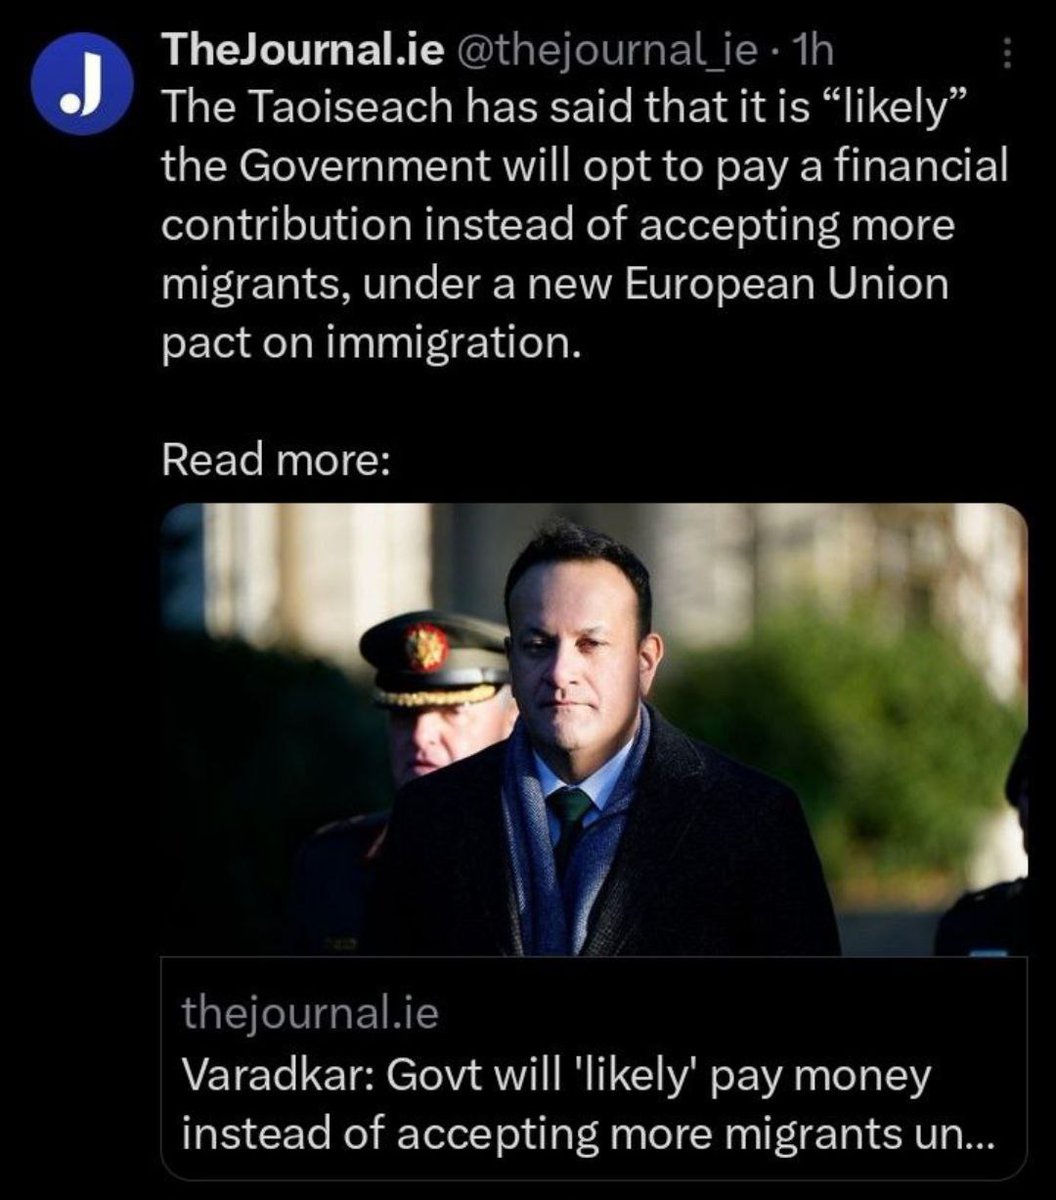 This is one of the things that annoys me most about EU membership. Why on earth should we have to pay them because we cannot take the current levels of immigration? We are not an independent nation. #IrelandisFull #Irishfreedom